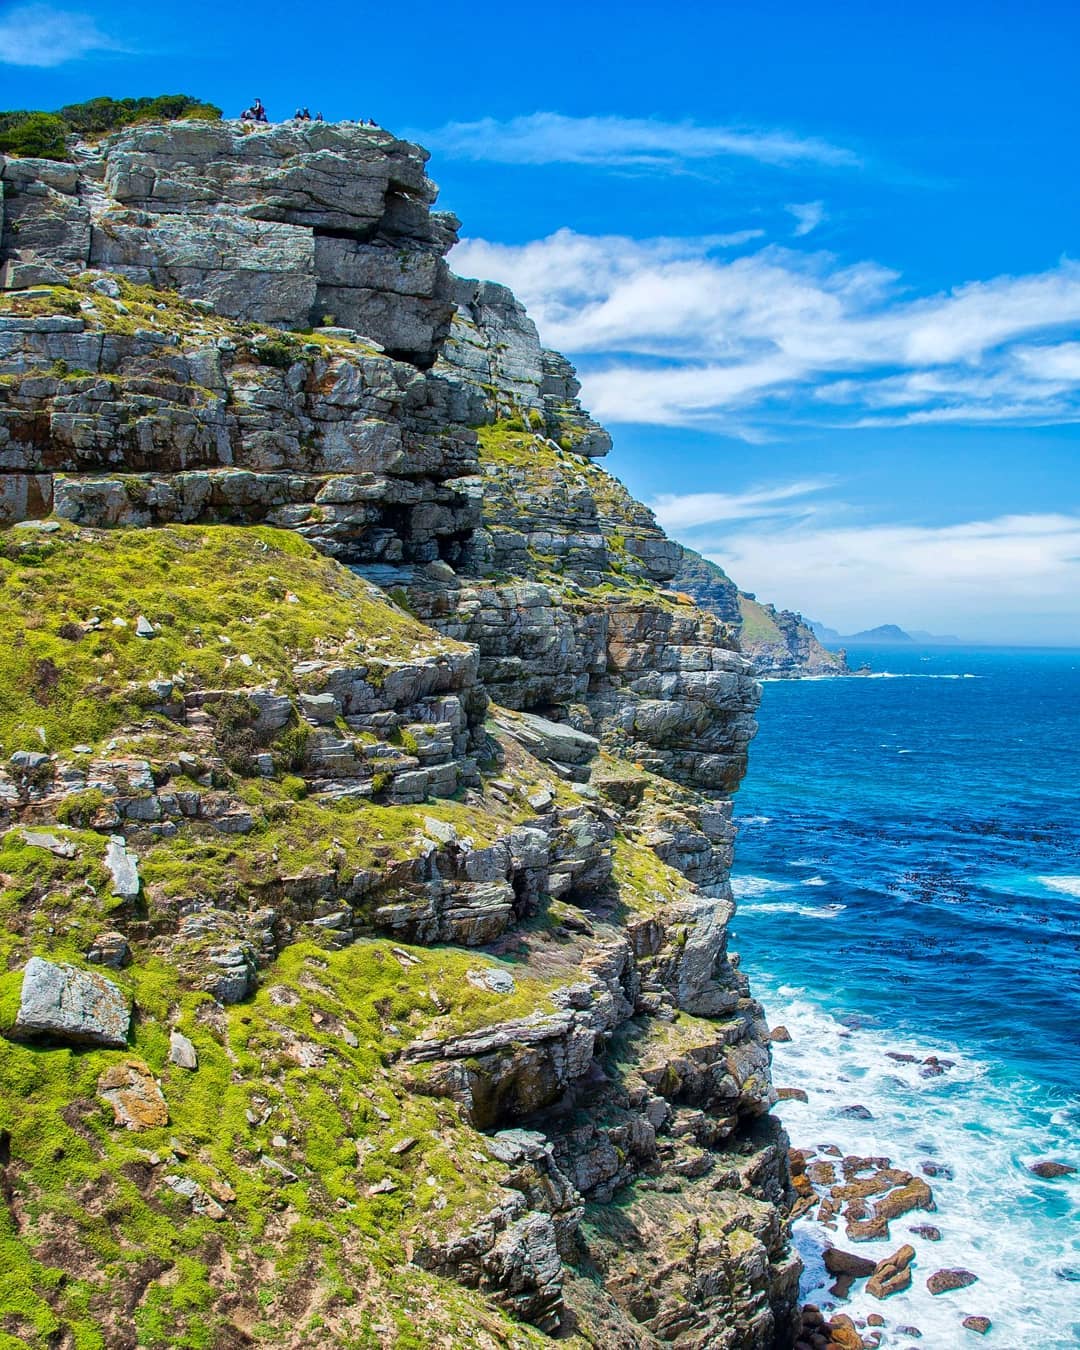 Where two oceans meet? Kind of...
⠀
Cape Point in South Africa is neither the southernmost point of Africa nor where the Atlantic and Indian oceans converge. That lies closer to Cape Agulhas located around 150km to the east-southeast of Cape Point.⠀
⠀
Regardless of their nautical (in-)significance, Cape Point and the Cape of Good Hope make for a beautiful day trip from Cape Town. The capes are a spectacular sight with towering rocky cliffs above crashing waves, banked by rolling green hills and craggy cliff tops.⠀
-⠀
-⠀
-⠀
-⠀
-⠀
-⠀
#CapeTown #CapeofGoodHope #SouthAfrica #lpPathfinders #rgphoto #BBCTravel #lonelyplanet #thisissouthafrica #MeetSouthAfrica #experiencesouthafrica #twooceans